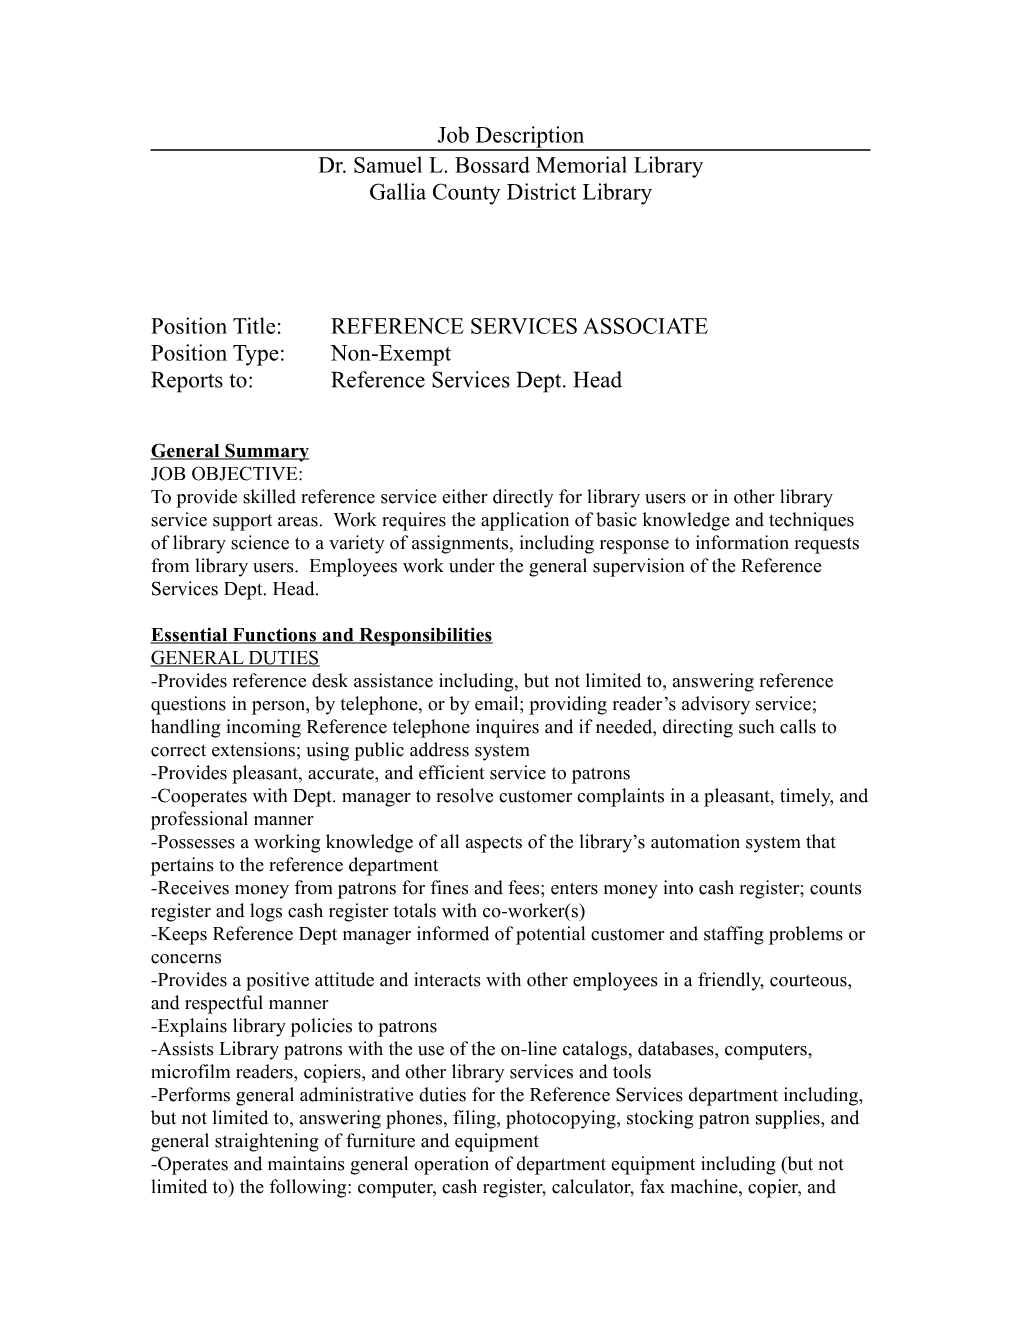 Position Title: REFERENCE SERVICES ASSOCIATE